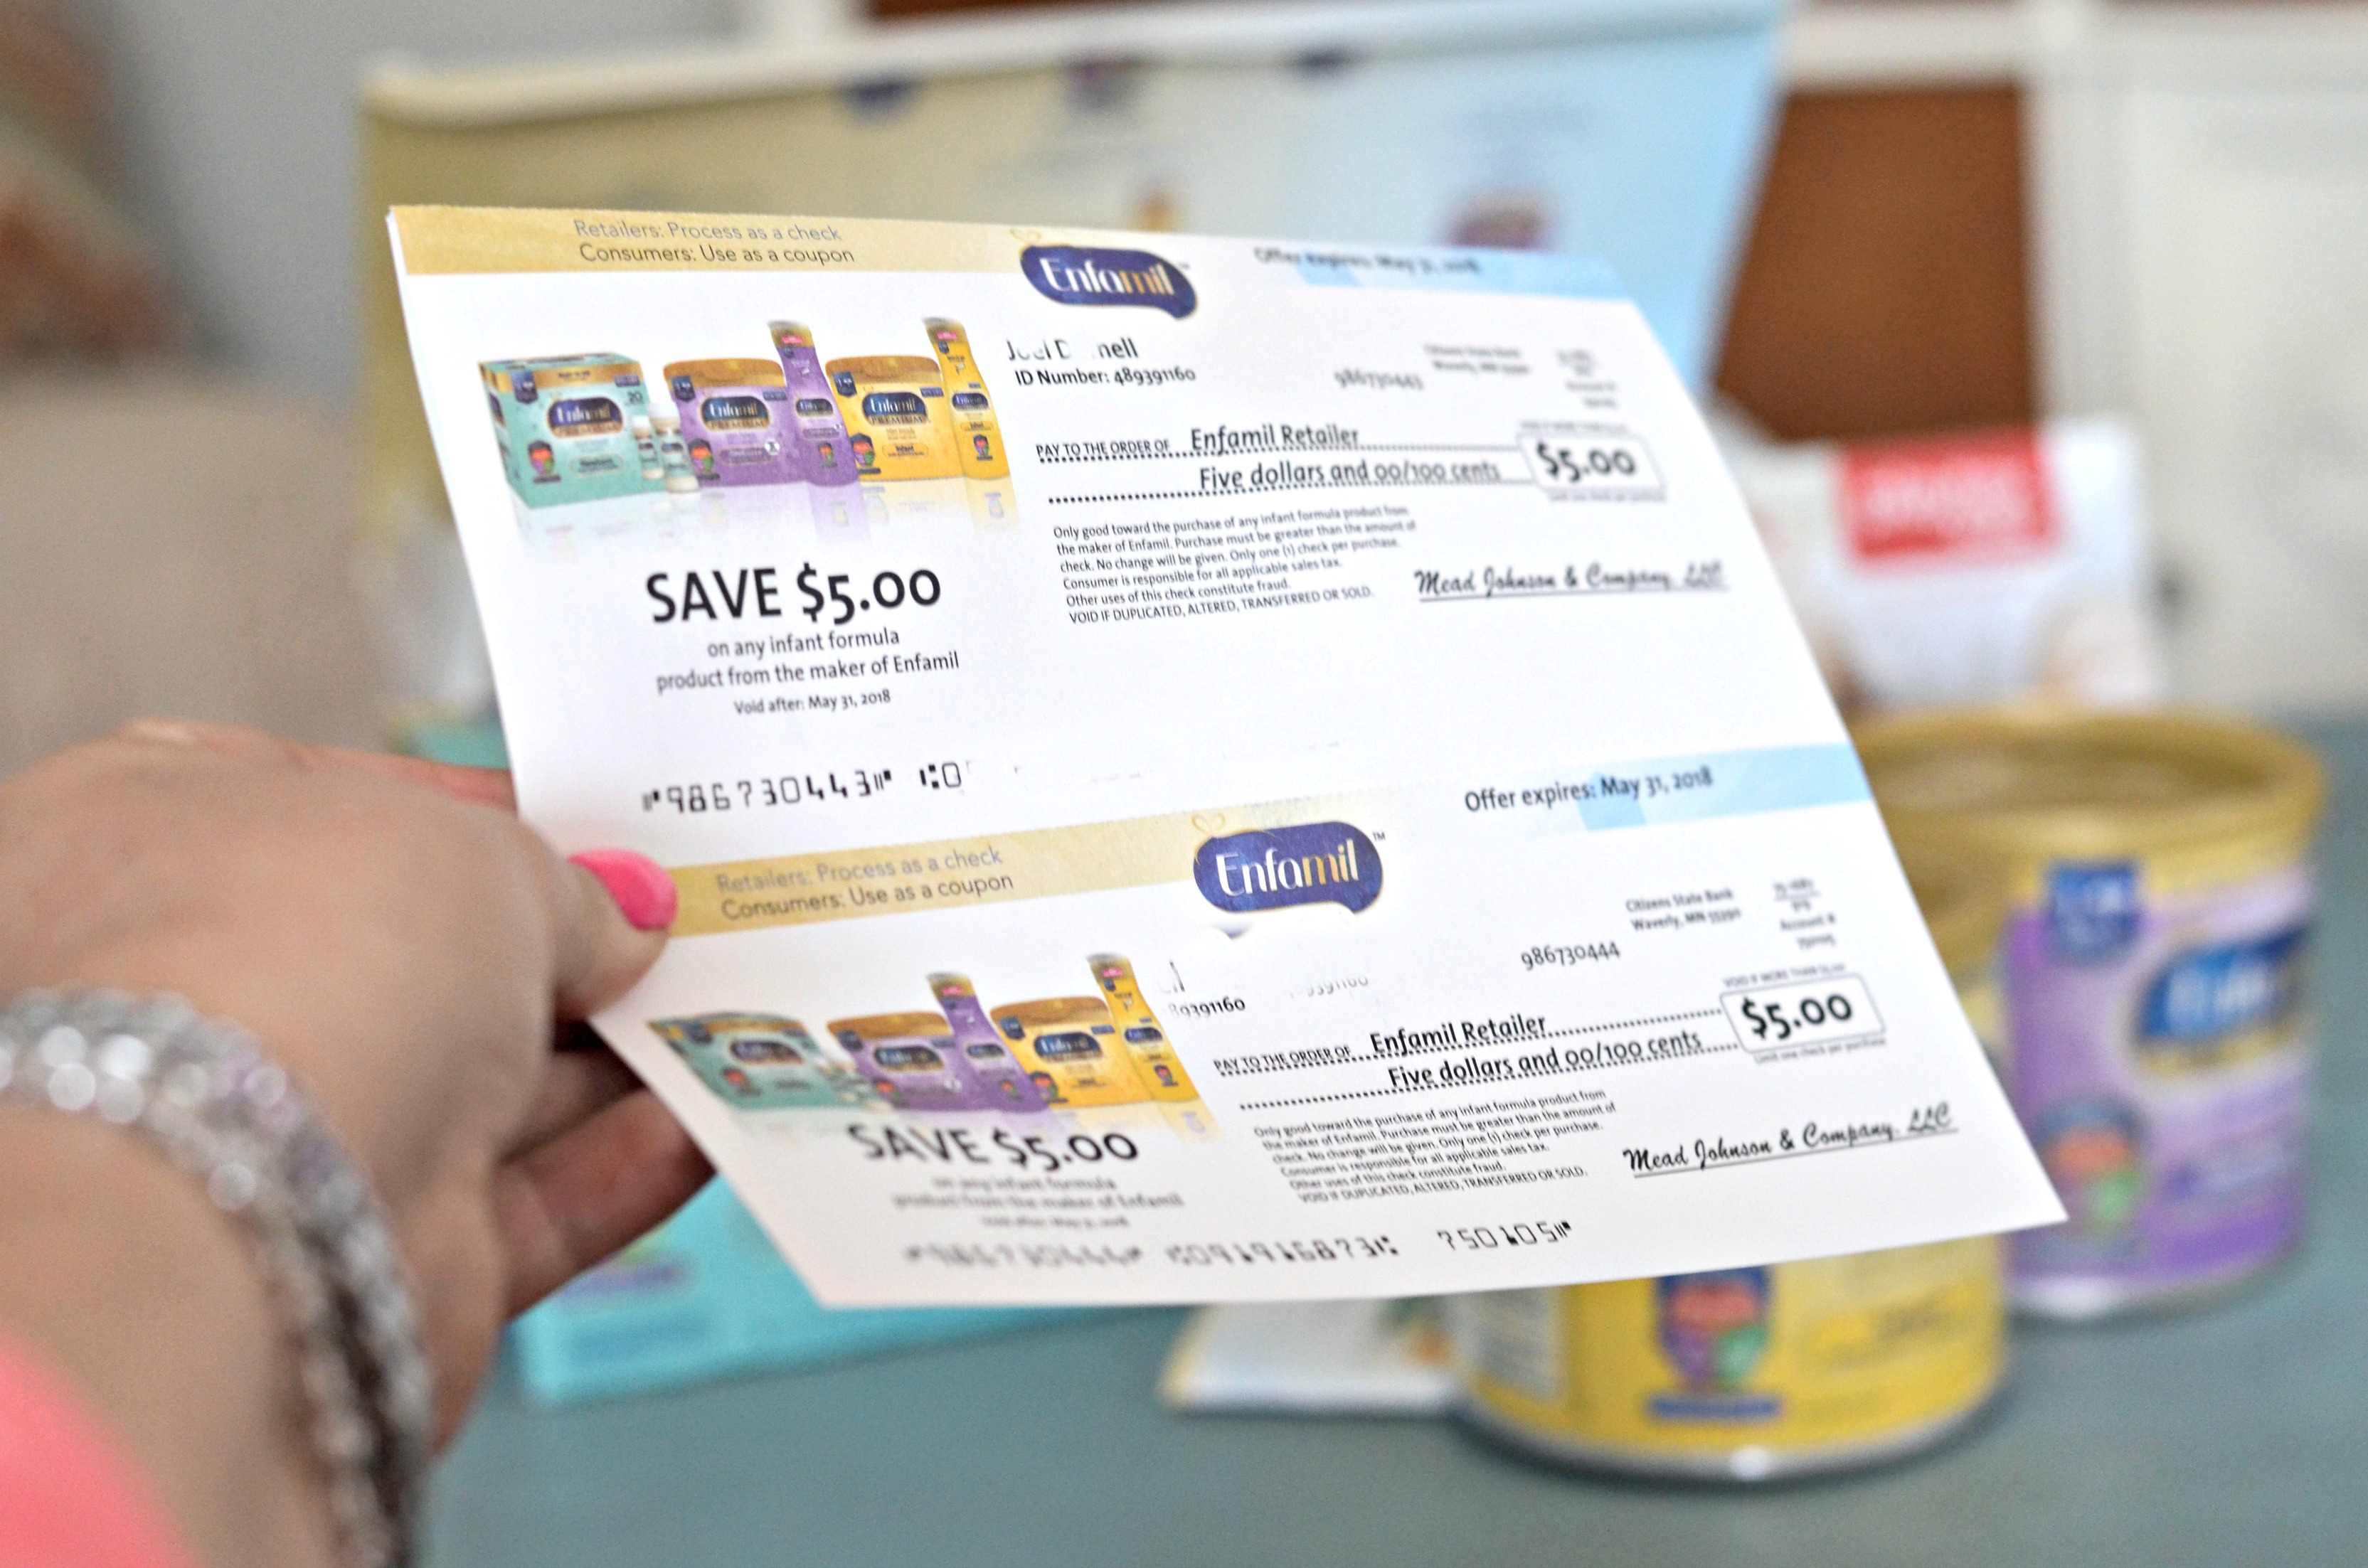 free enfamil baby box - get free enfamil gifts and offers like these Enfamil Checks